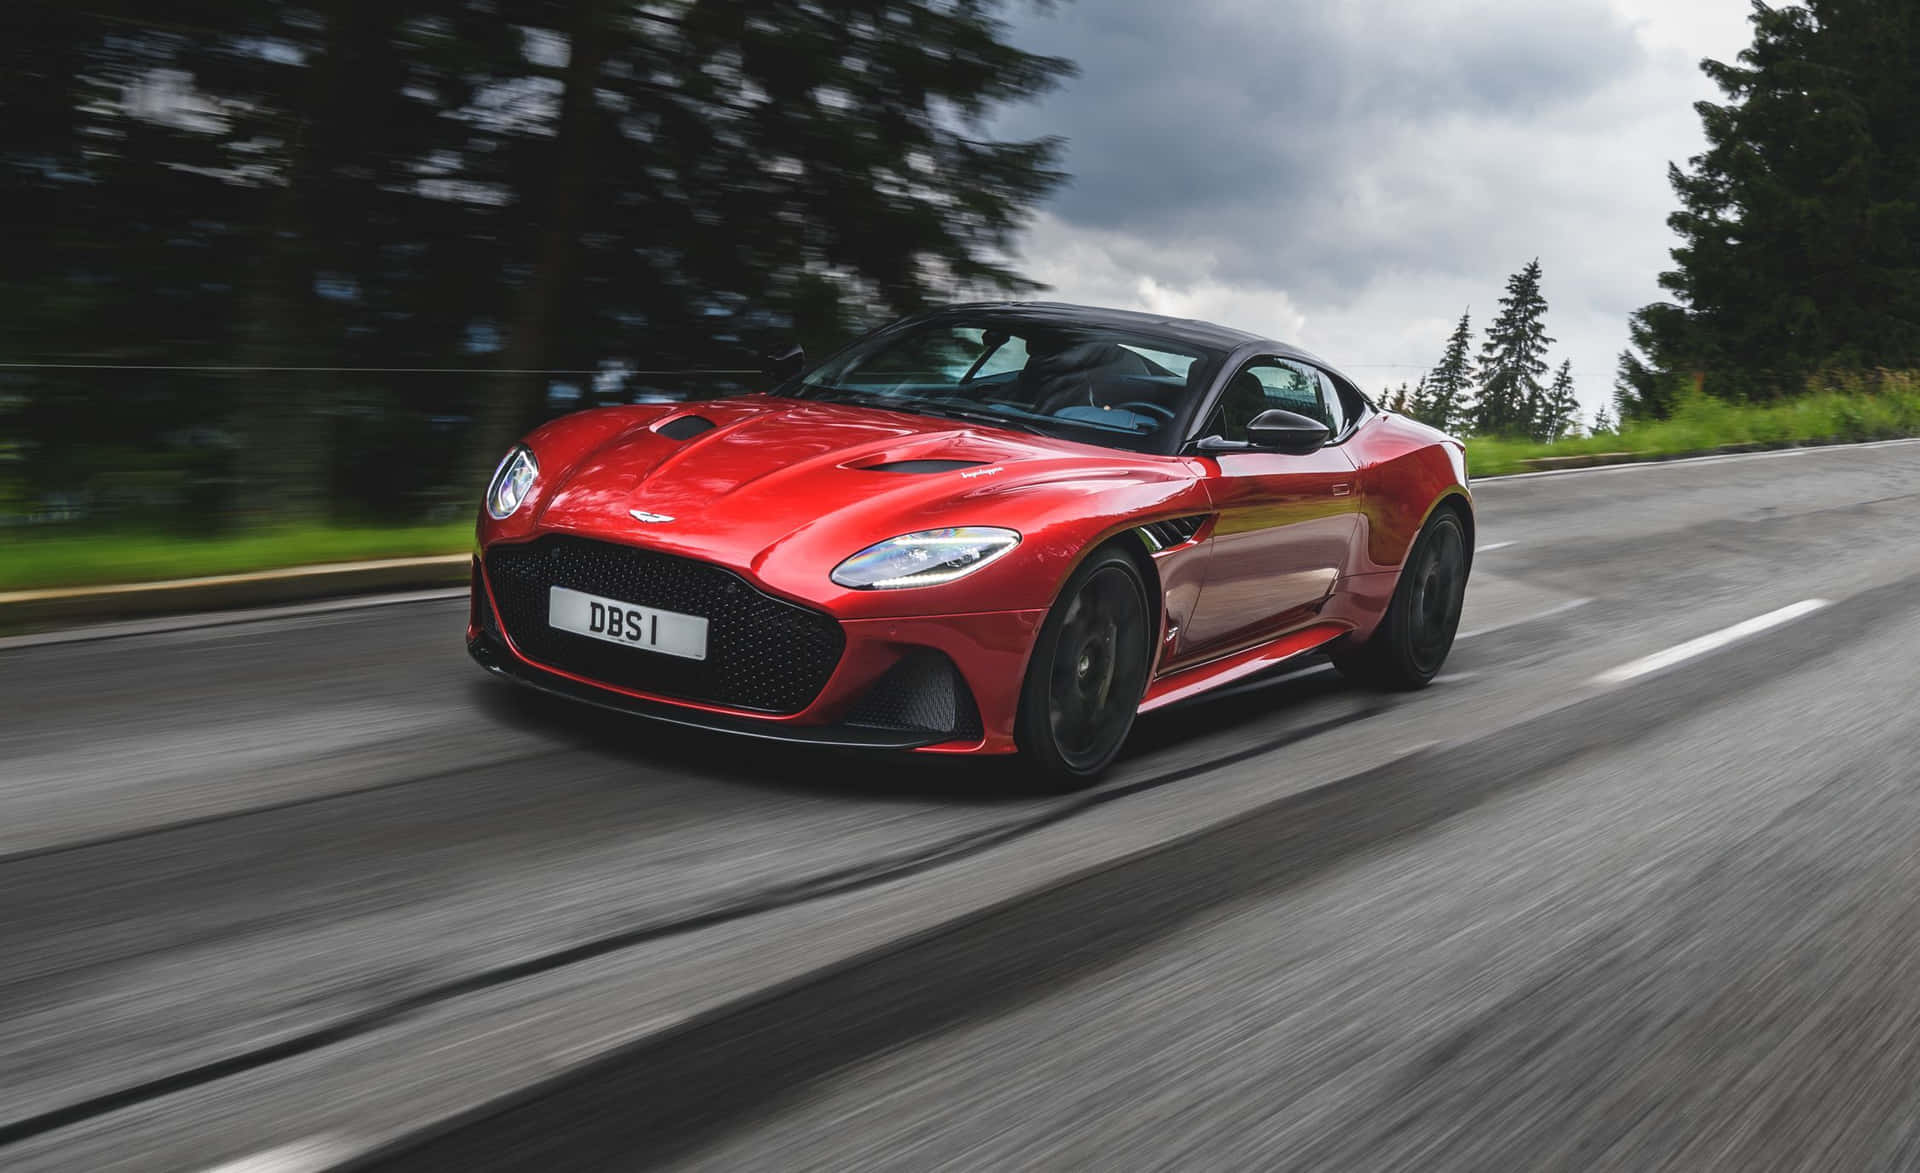 Image  Get Ready for a High-Performance Drive in the Aston Martin